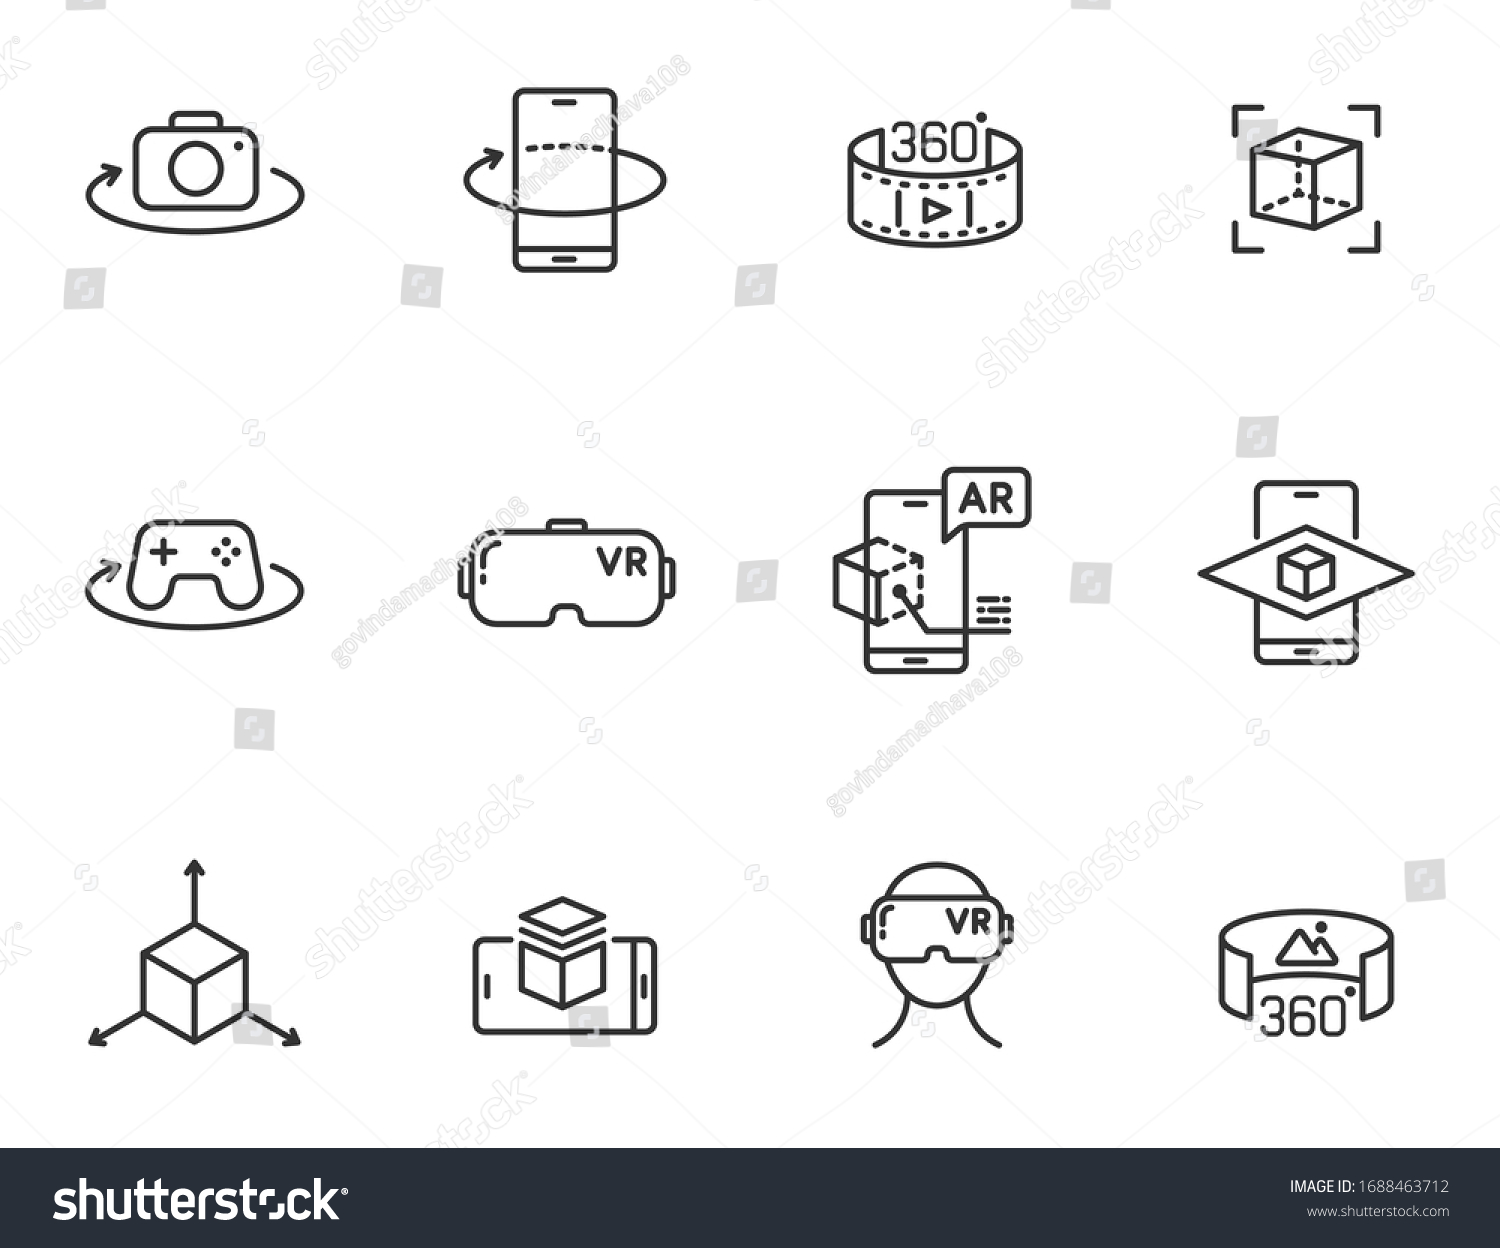 AR and VR line icon set isolated on white background. Virtual and augmented reality outline icons for web design, mobile apps, ui design and print. 3D visualization technology #1688463712